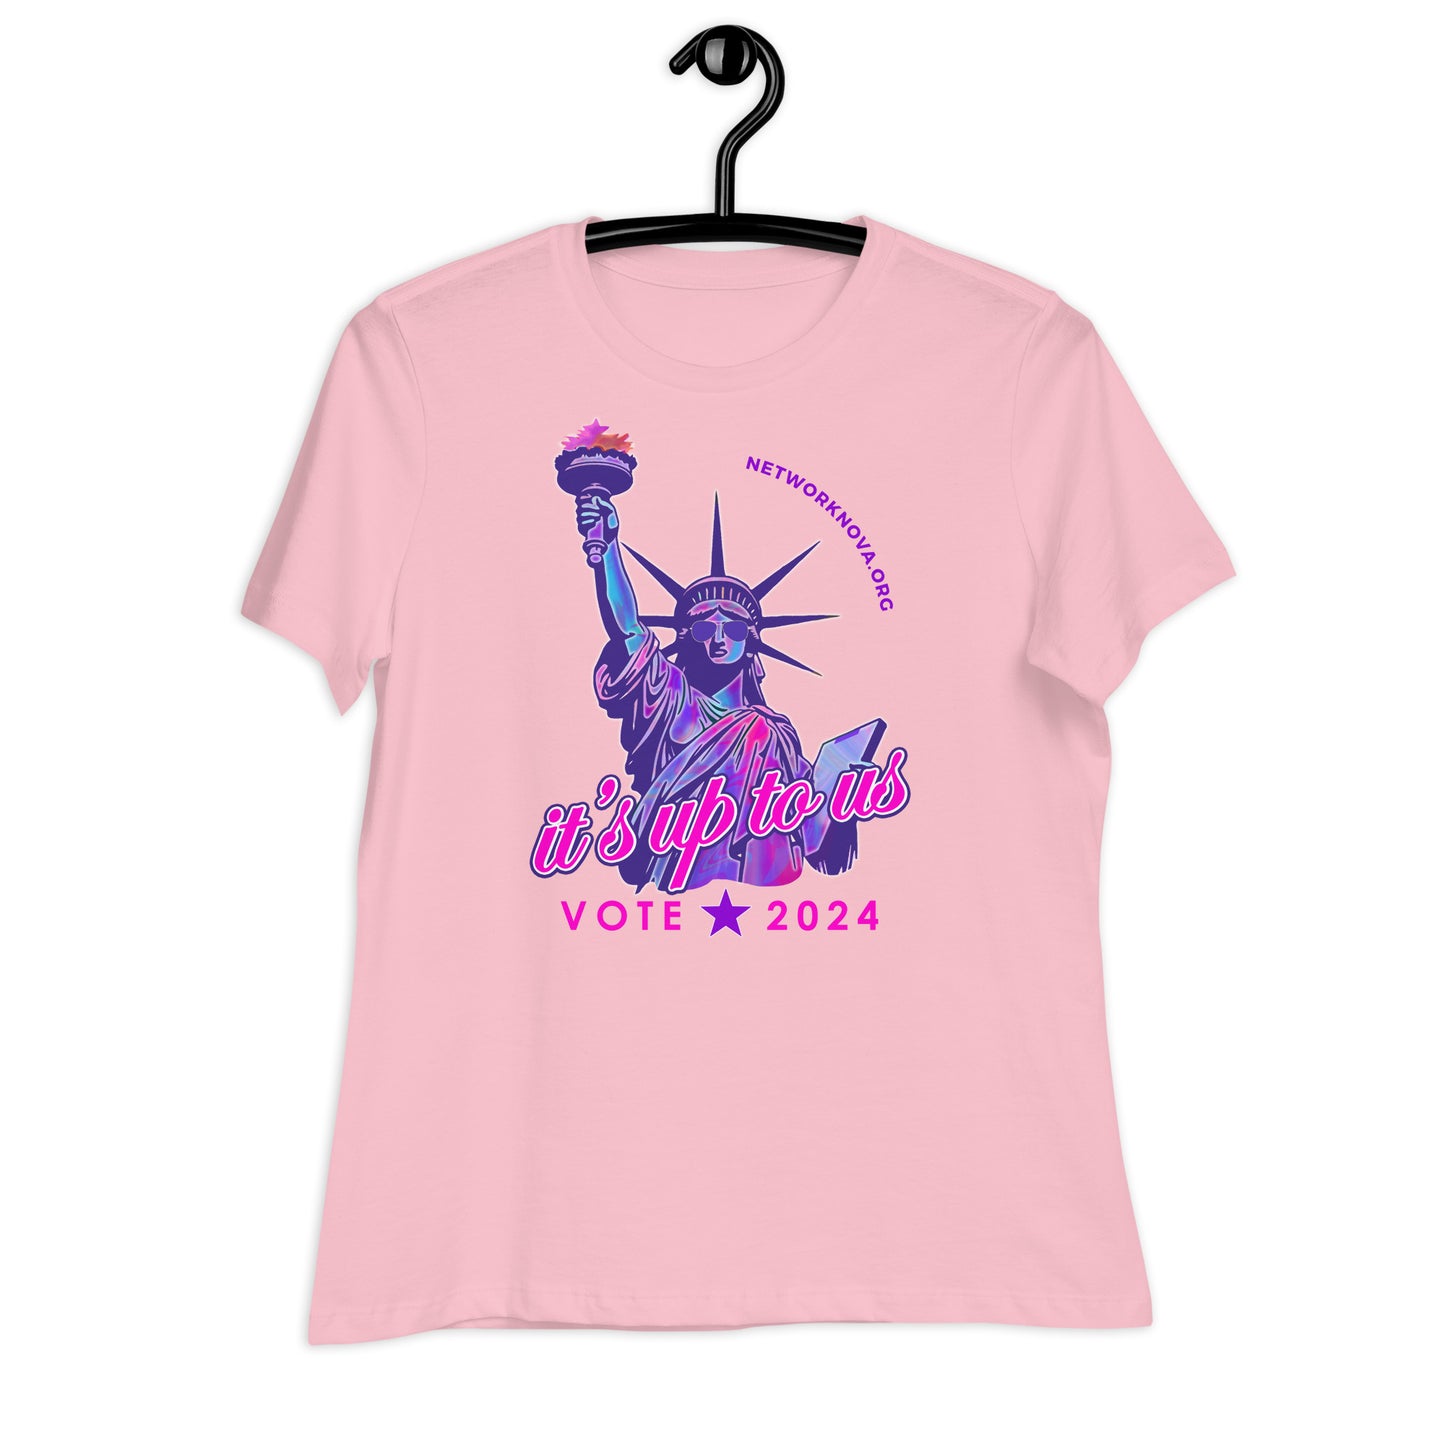 It's Up to Us Women's T-Shirt